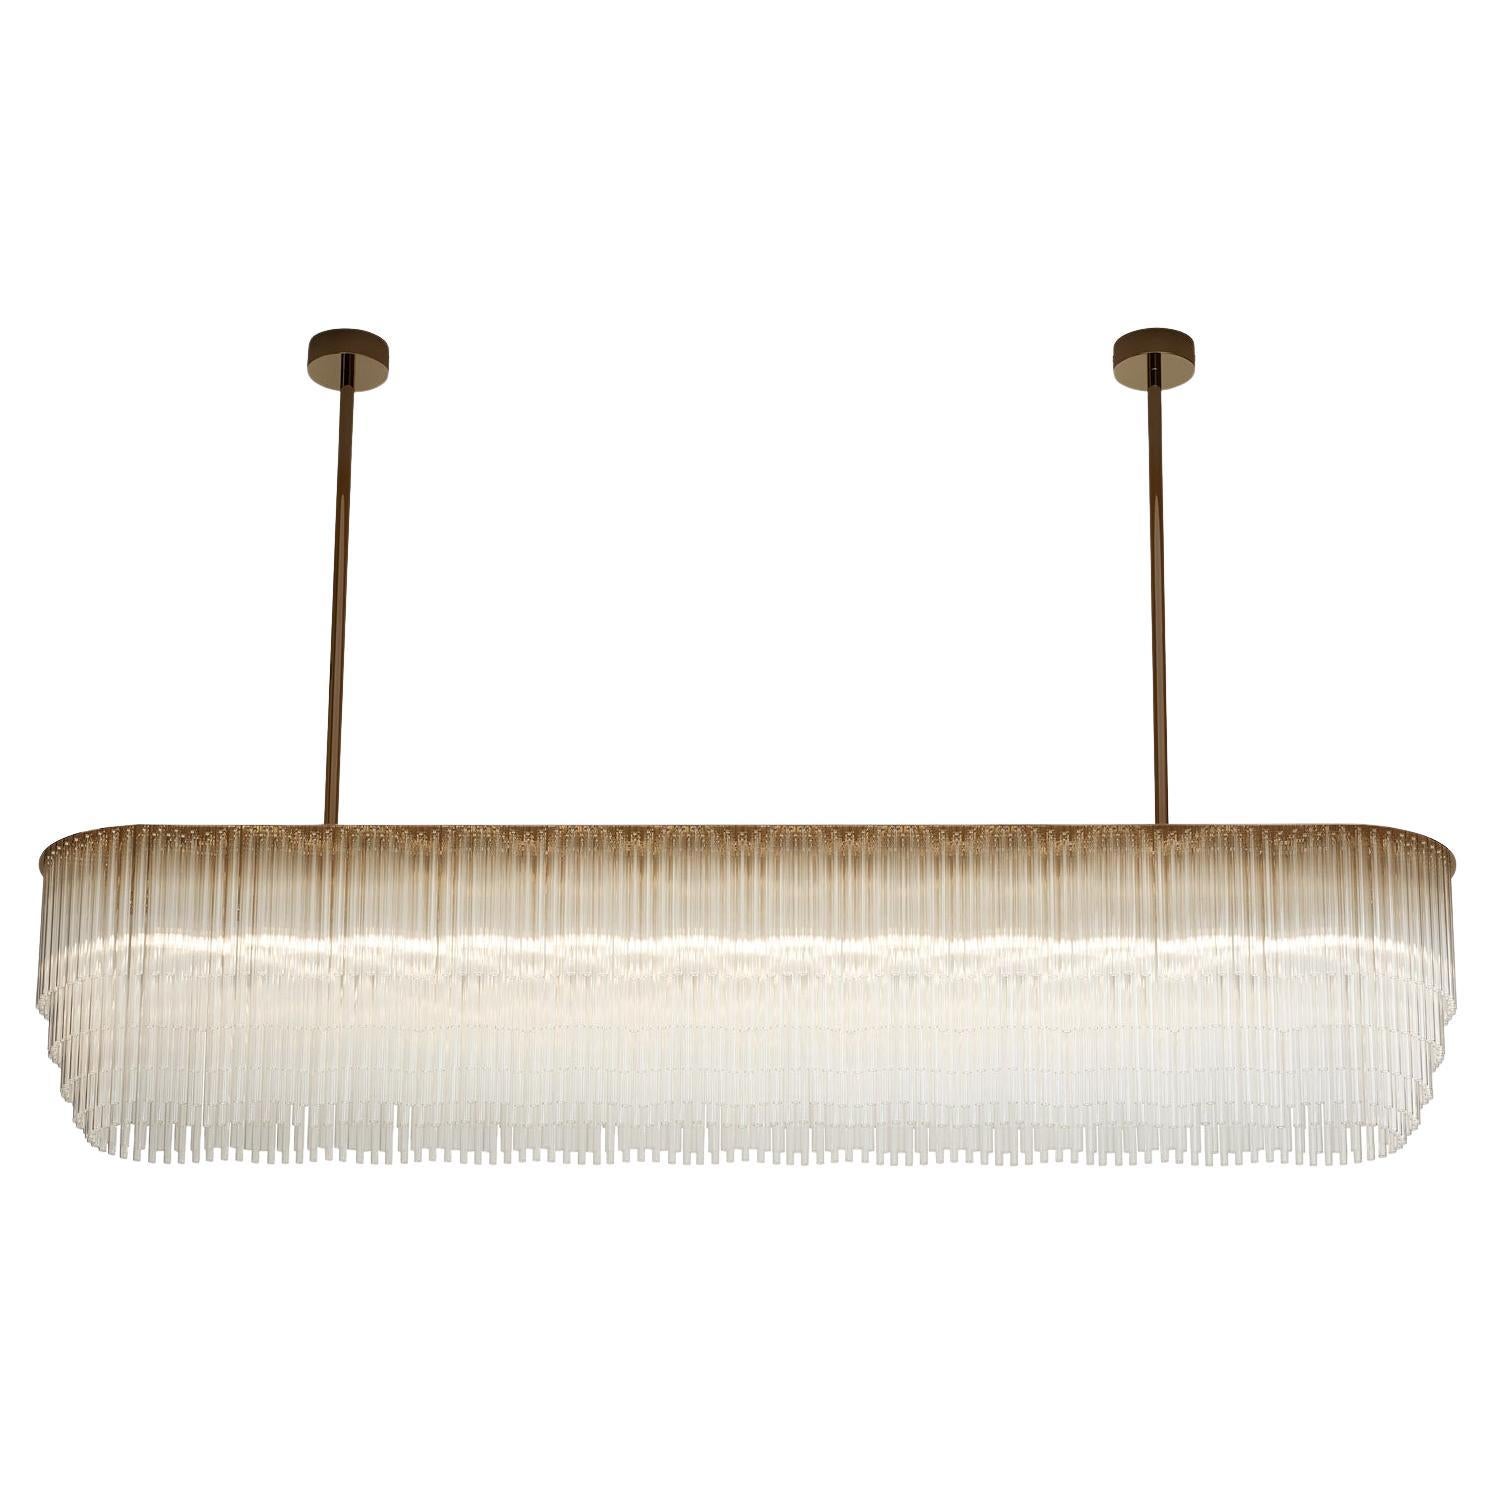 Linear Chandelier 1915mm / 75.25" in Brass-based Bronze and Tiered Glass Profile